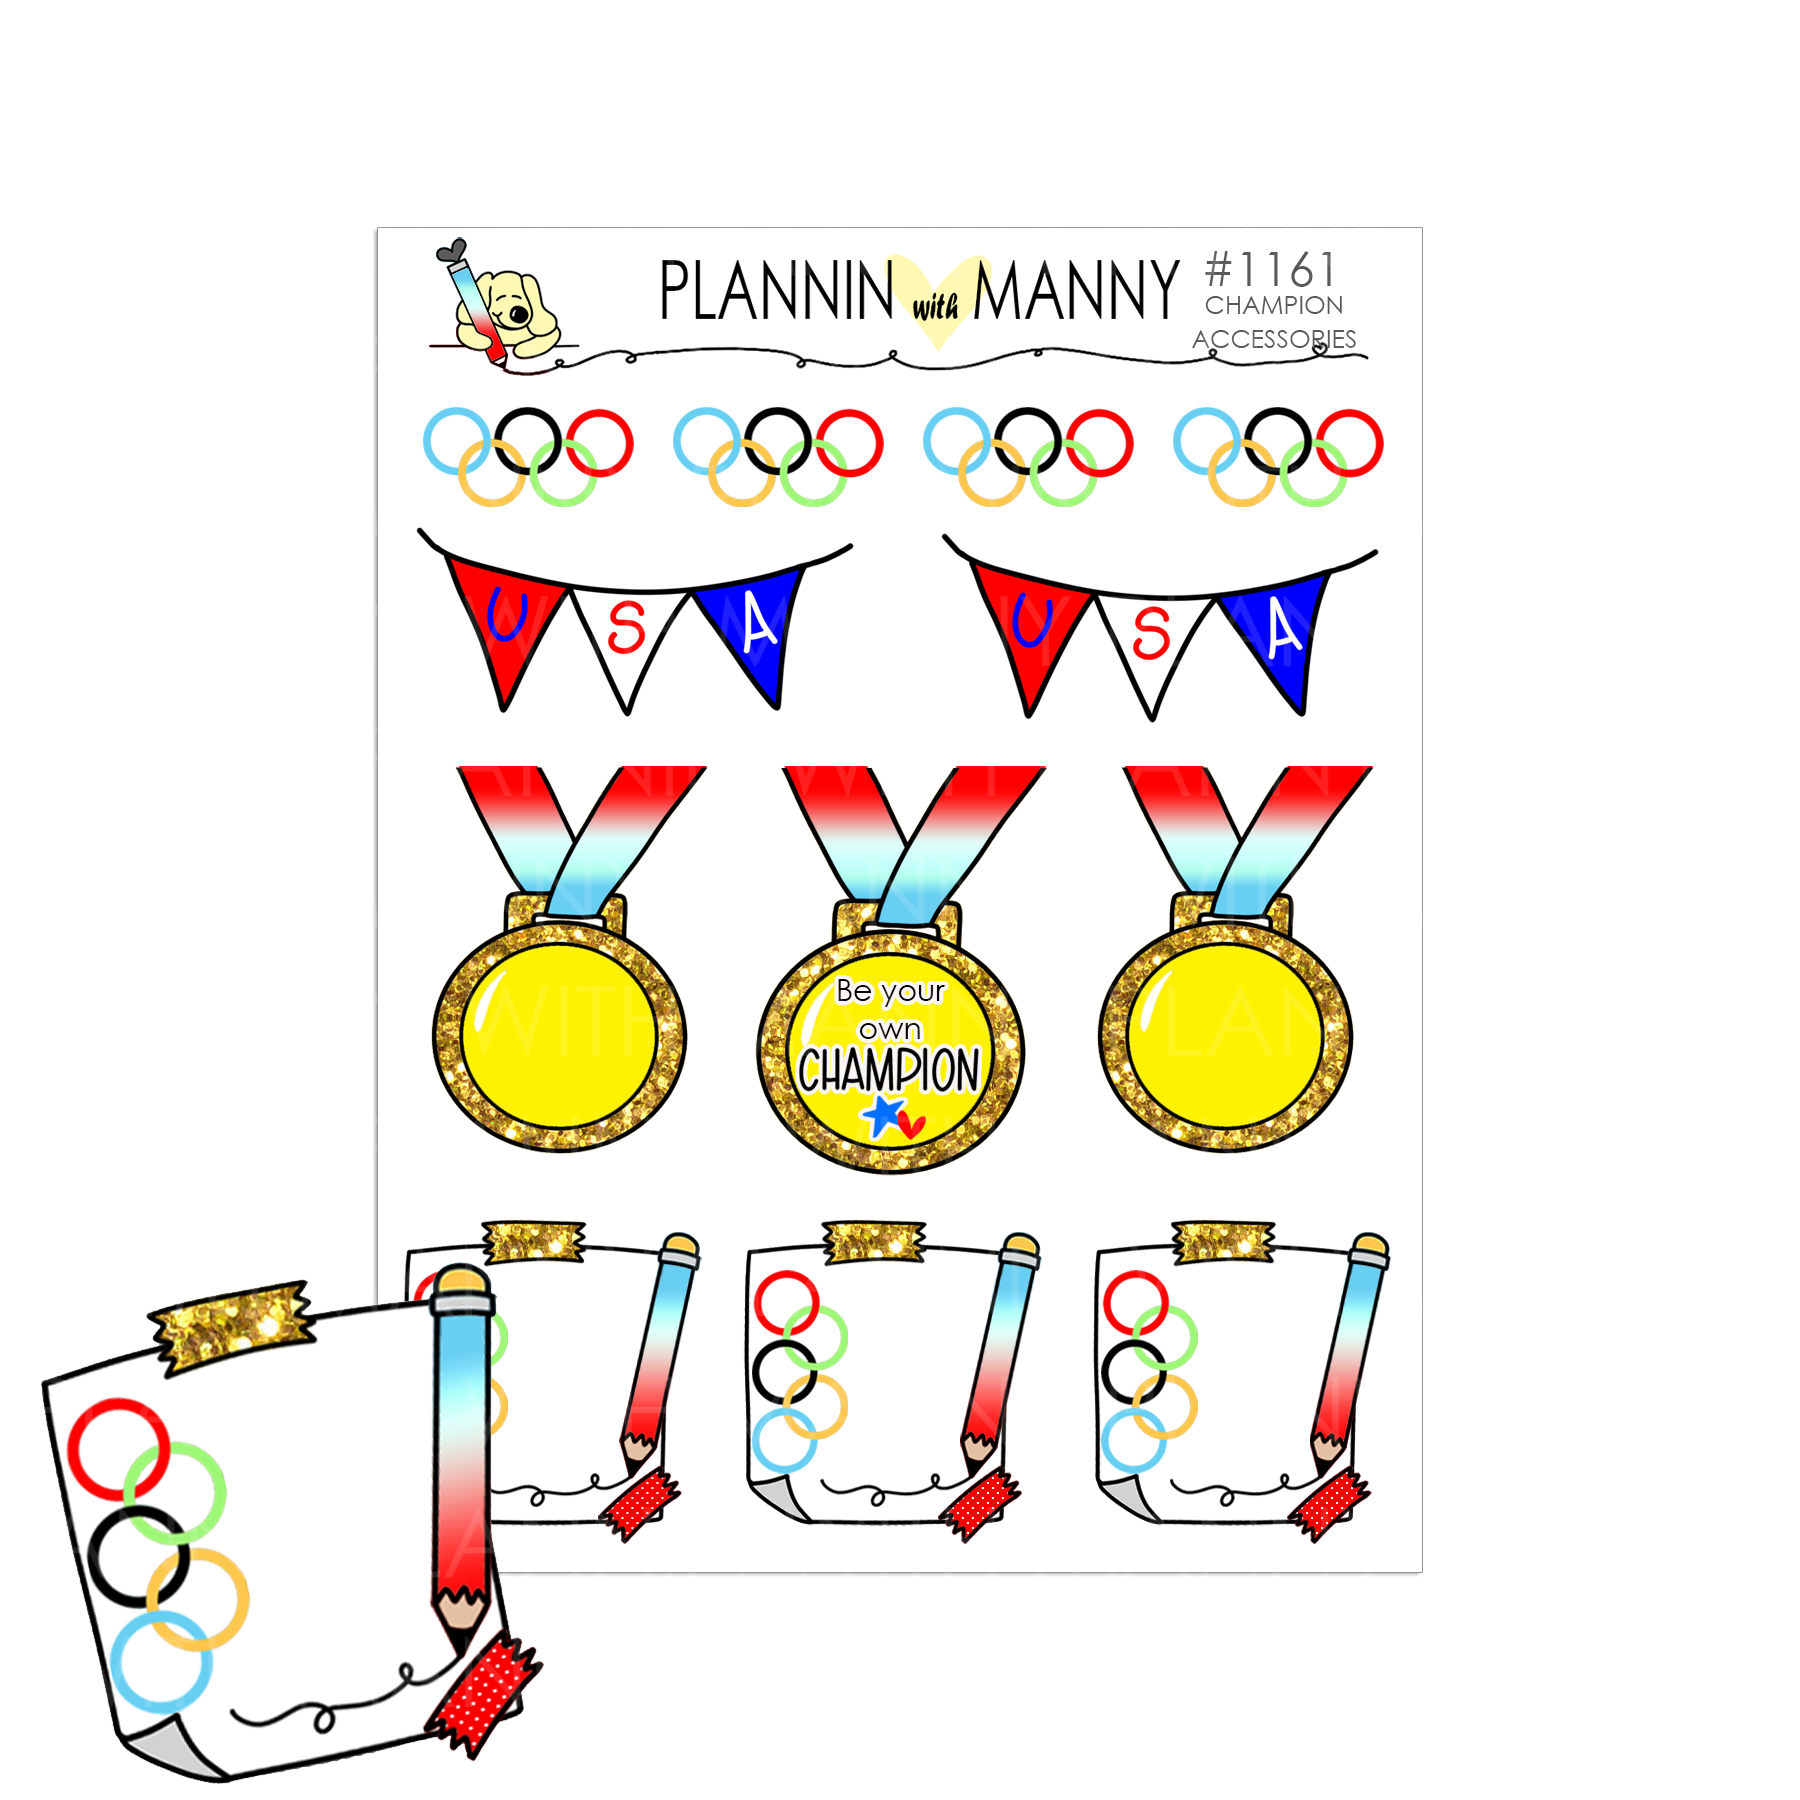 1161 CHAMPIONS ACCESSORY Planner Stickers - Champions Collection